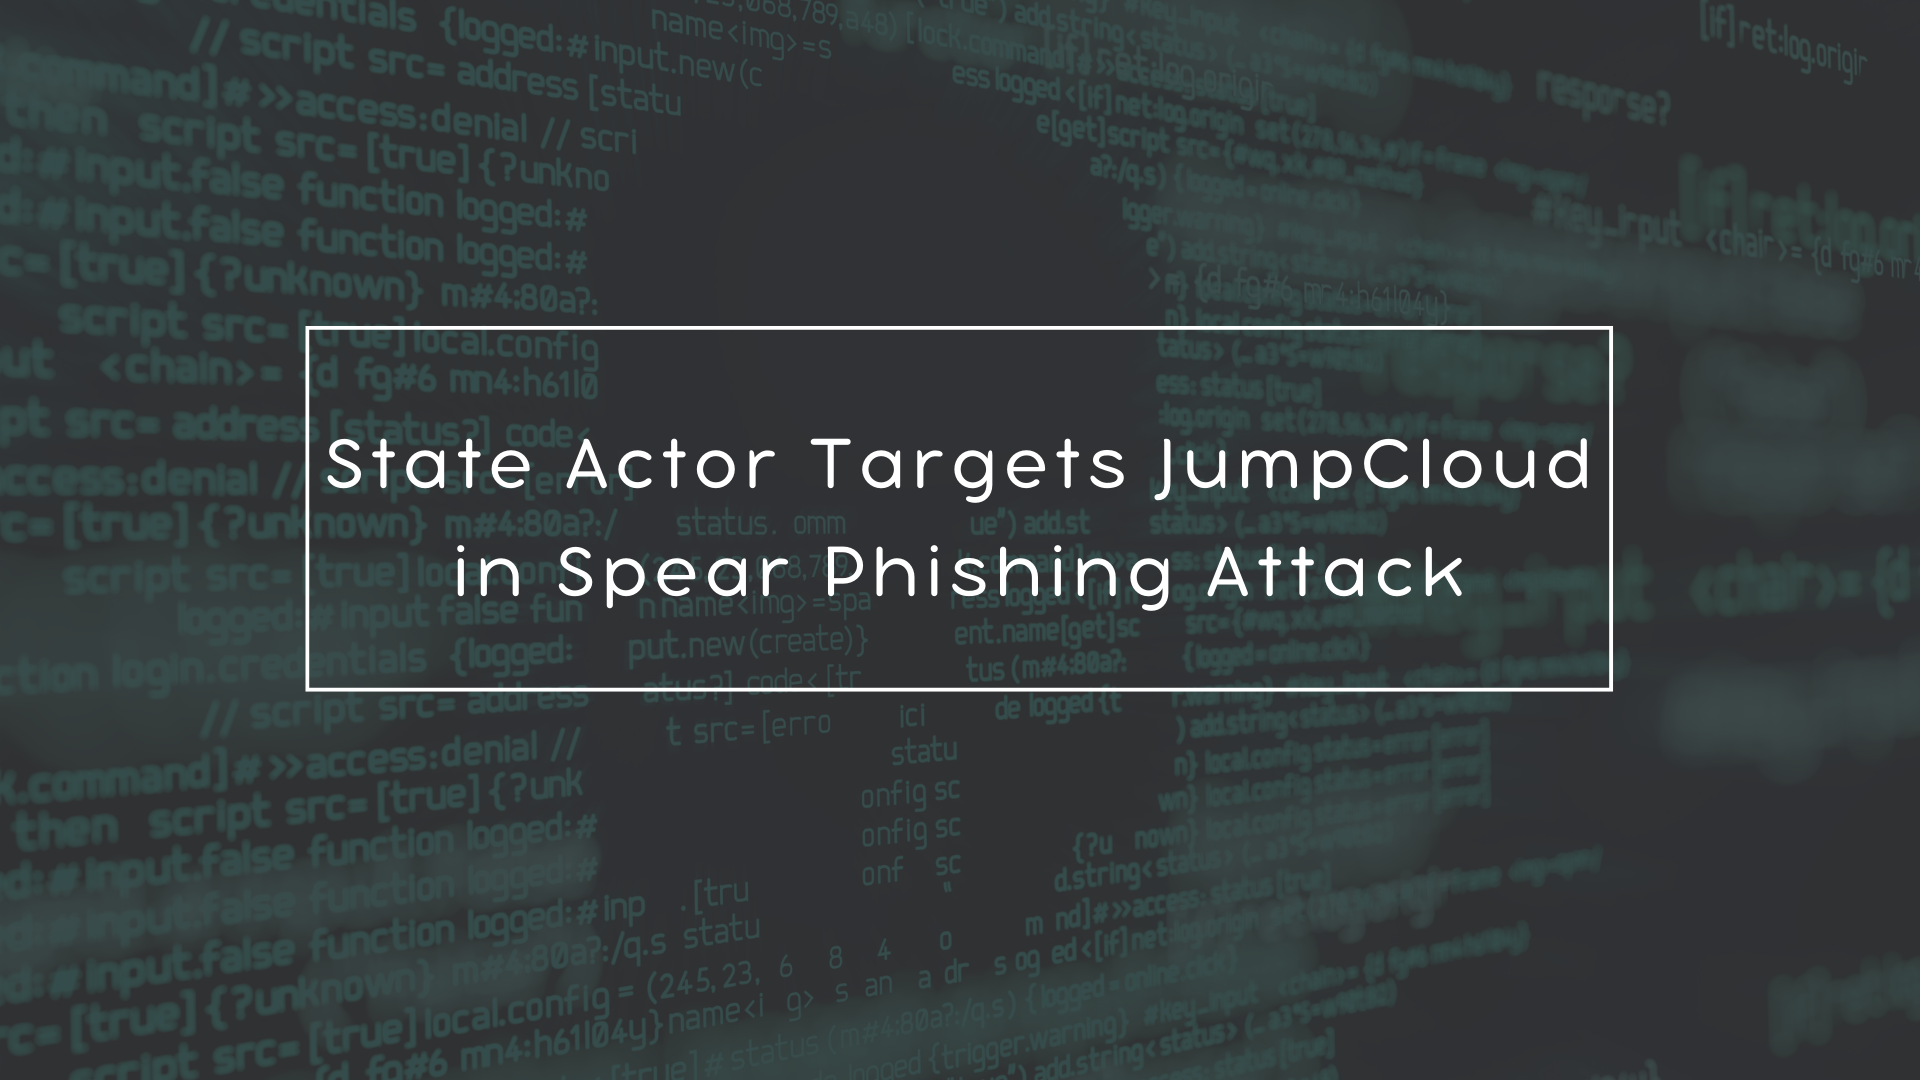 State Actor Targets JumpCloud in Spear Phishing Attack